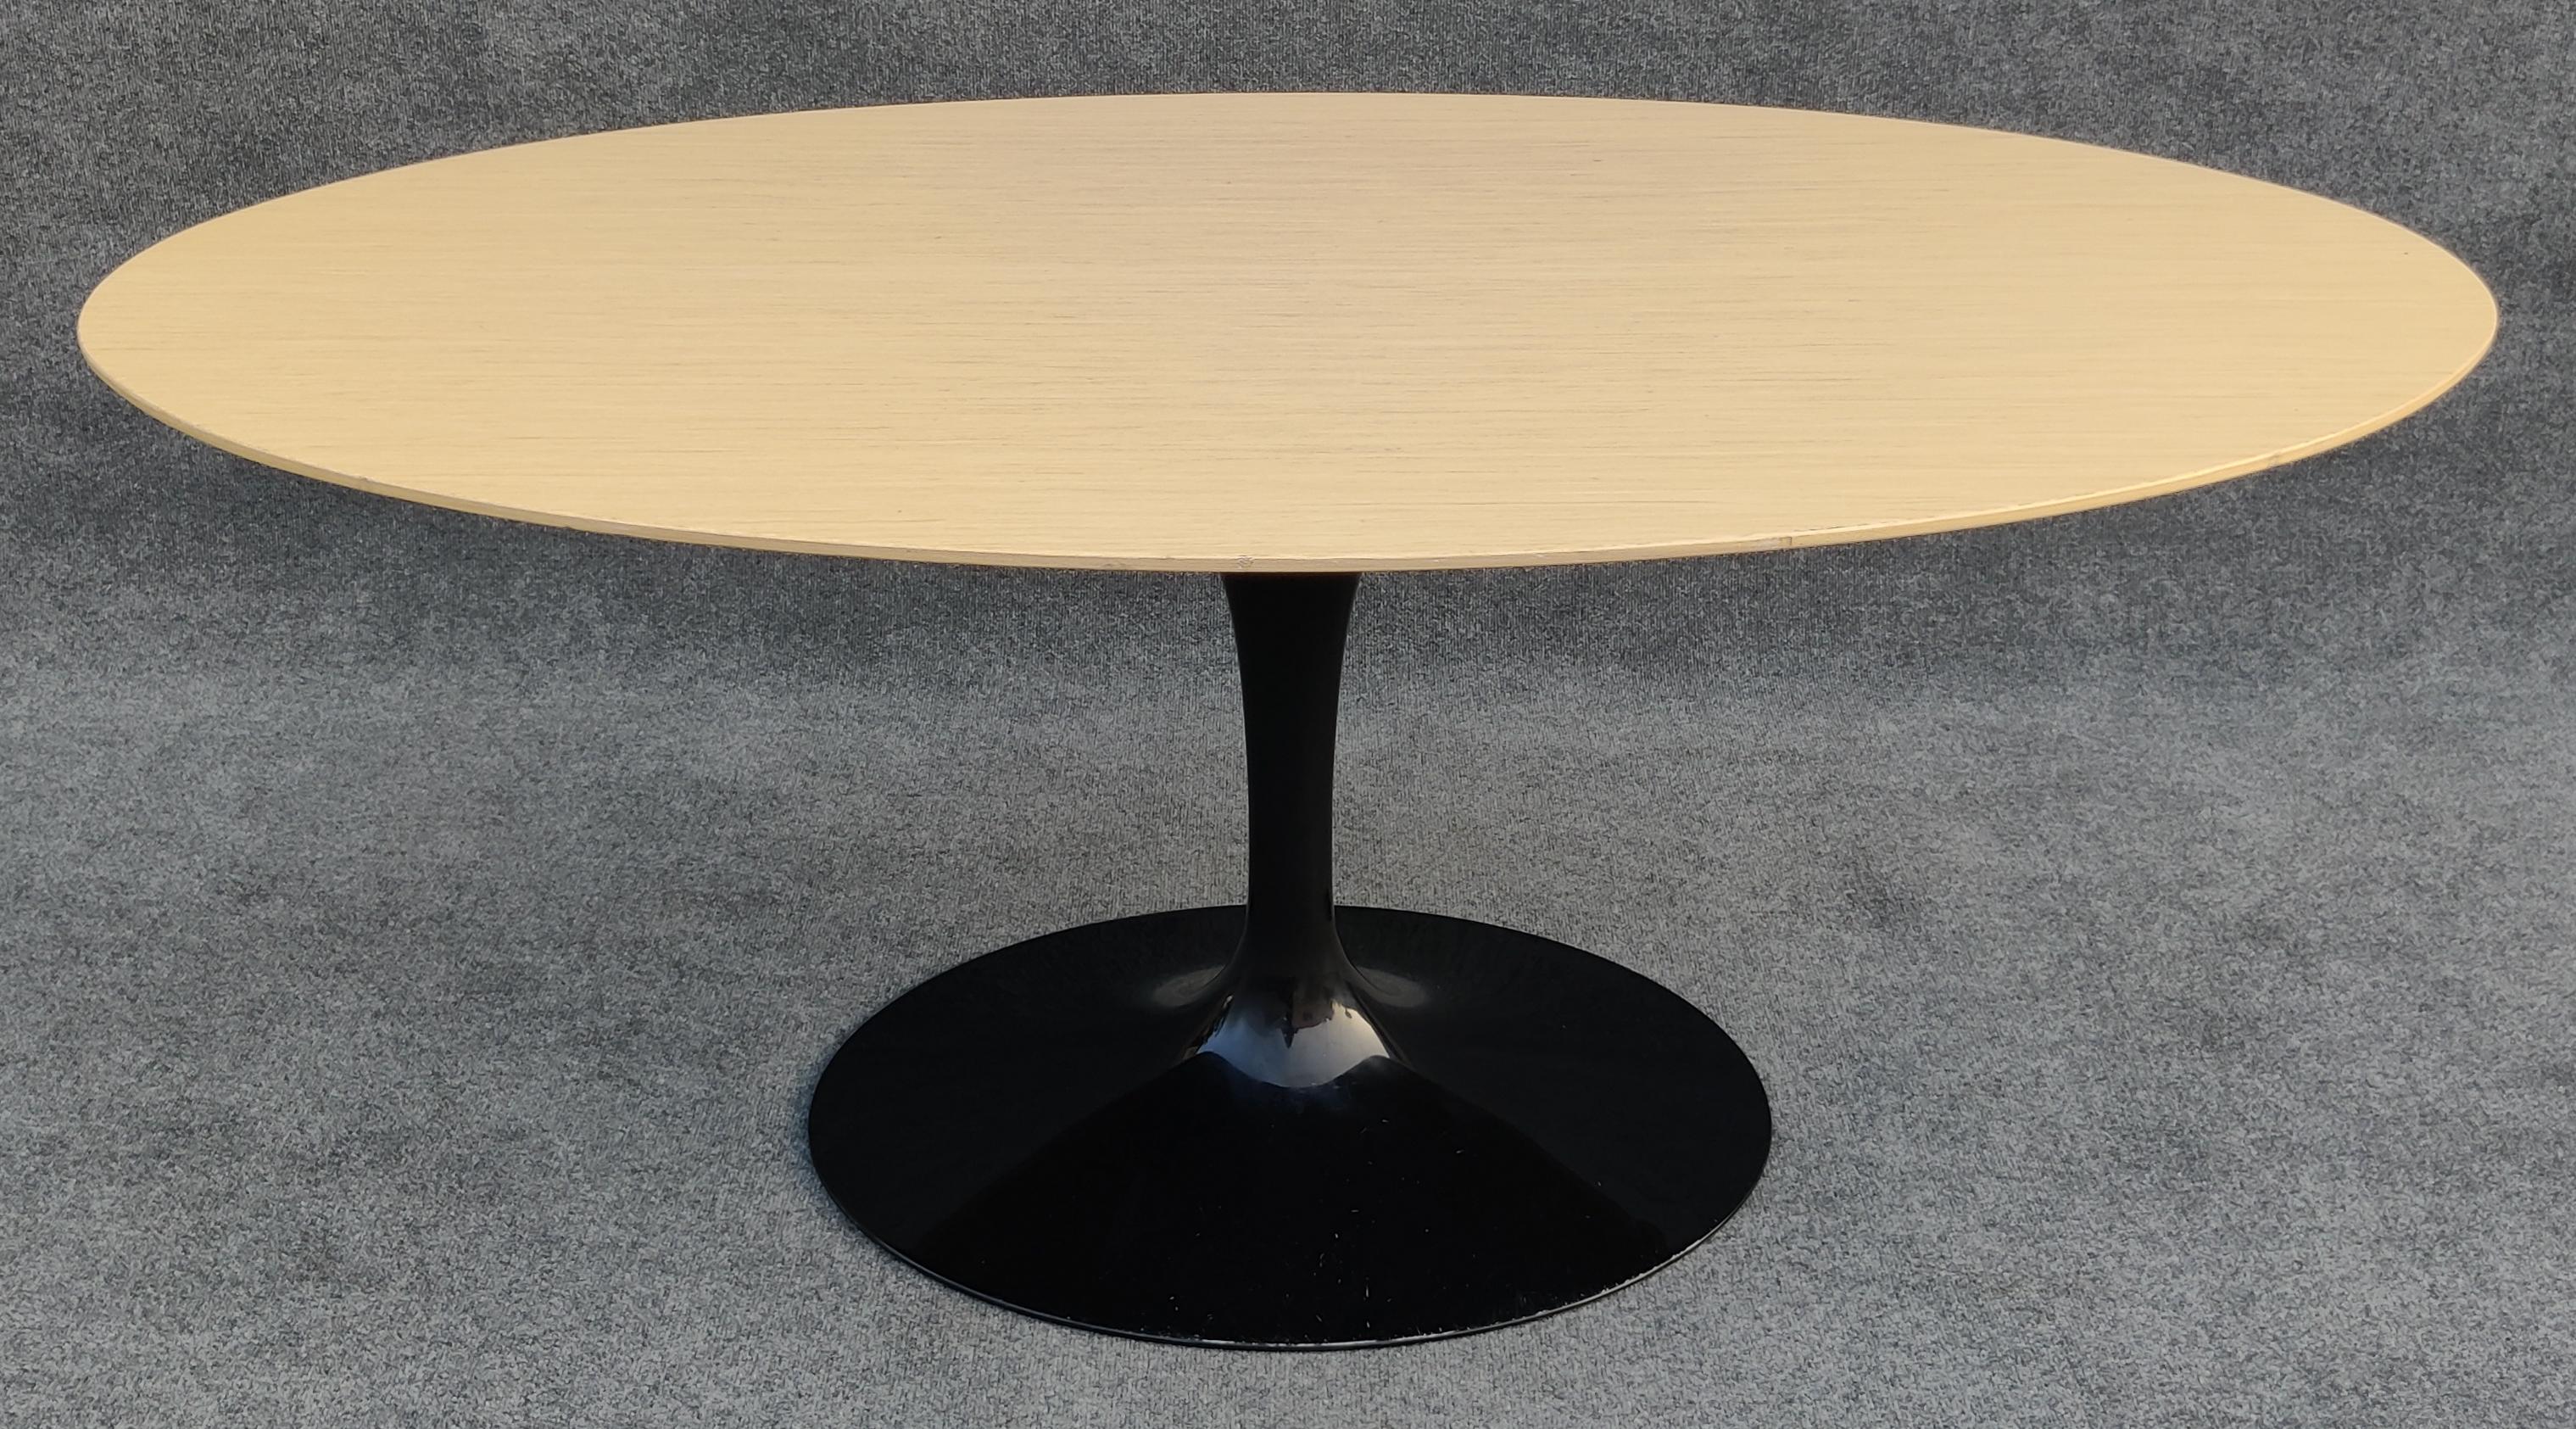 Signed and dated Eero Saarinen for Knoll oval Tulip dining table in blond wood with oval plastic-coated cast-aluminum base. This table has an unusual size that was likely a custom order. It is just the right size to be an ample 6-person table in a